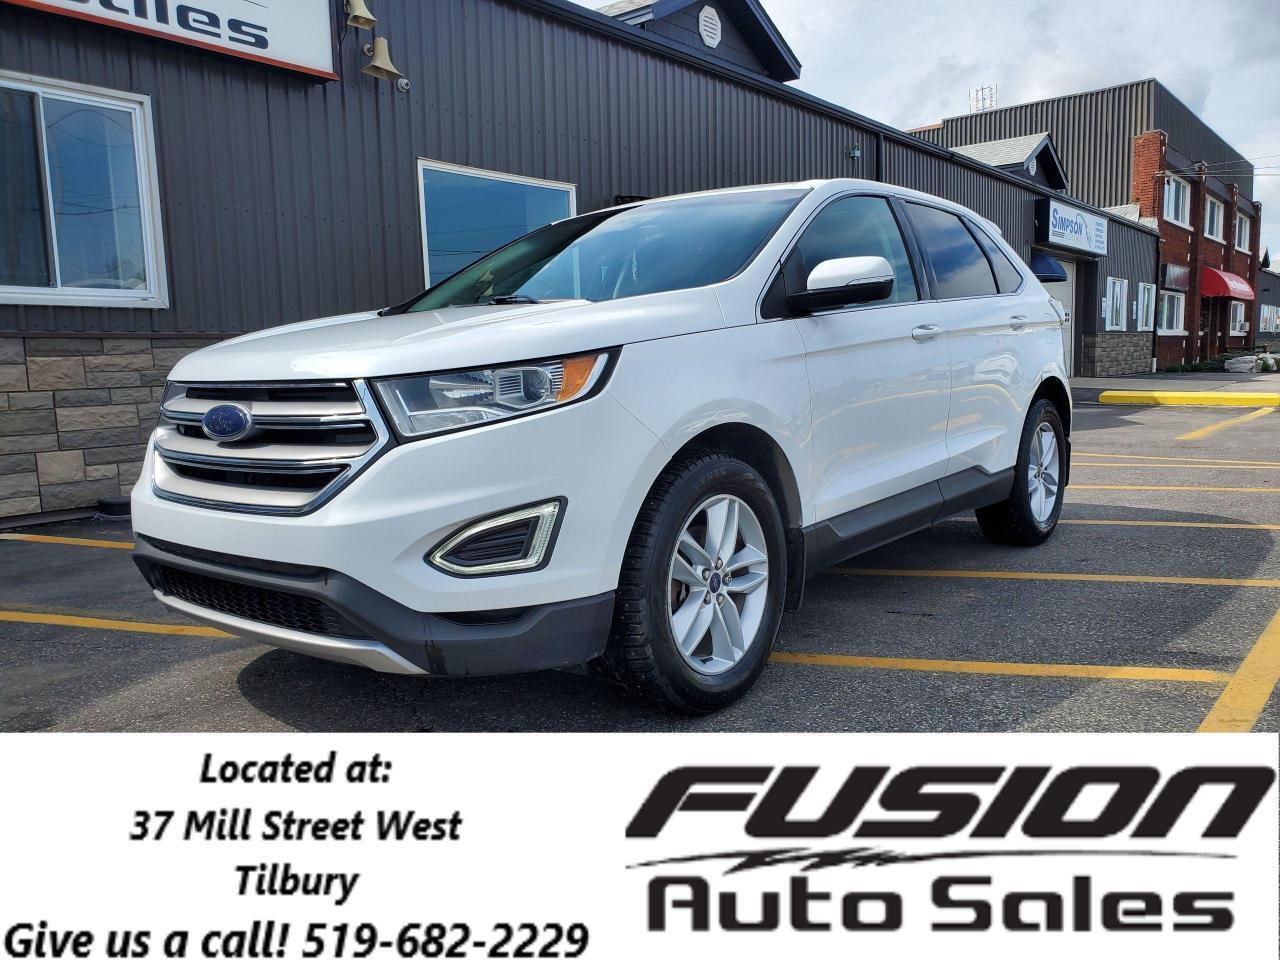 2017 Ford Edge Sel-NO HST TO A MAX OF $2000 LTD TIME ONLY